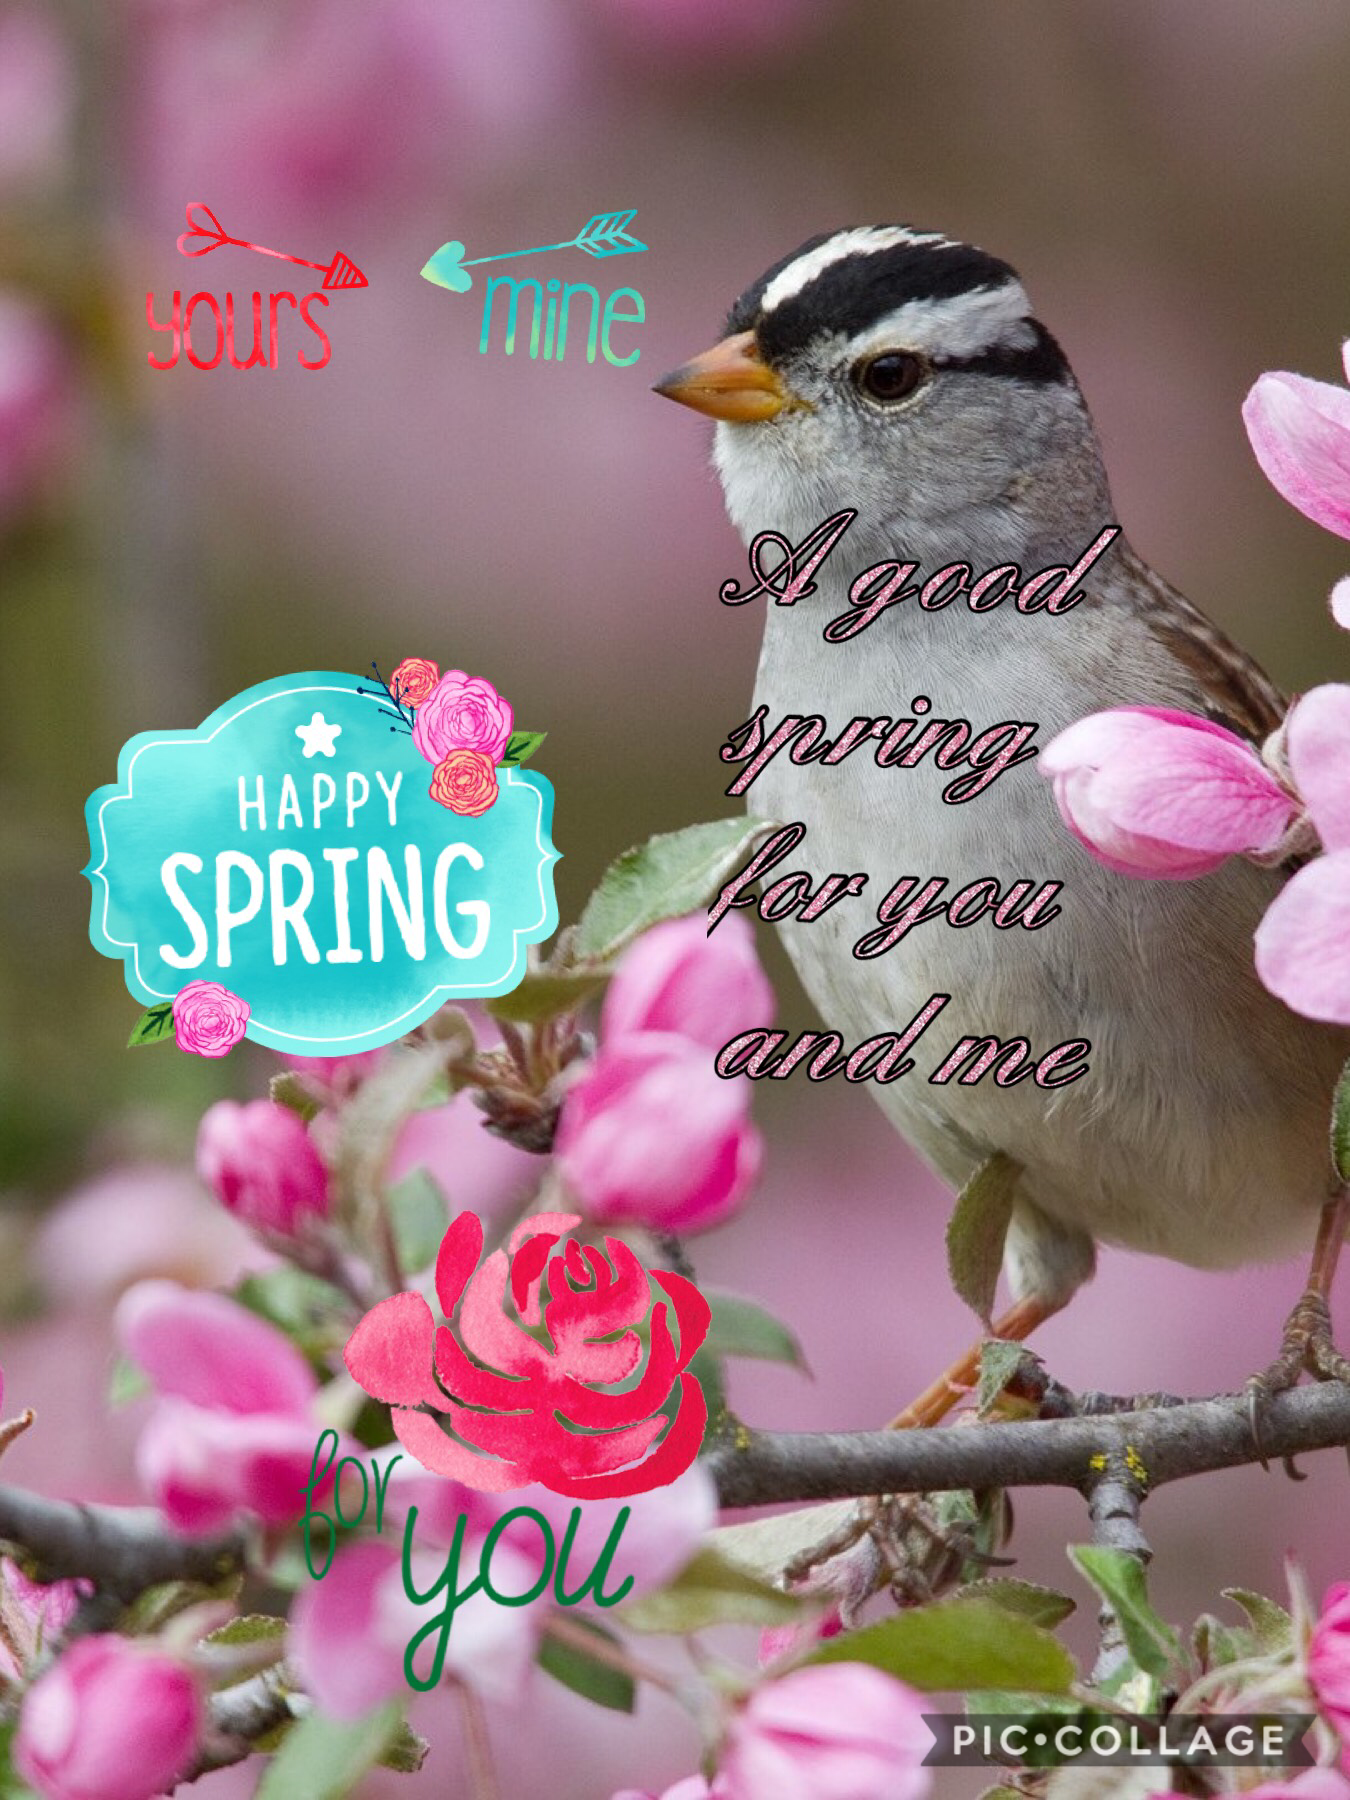 Your spring